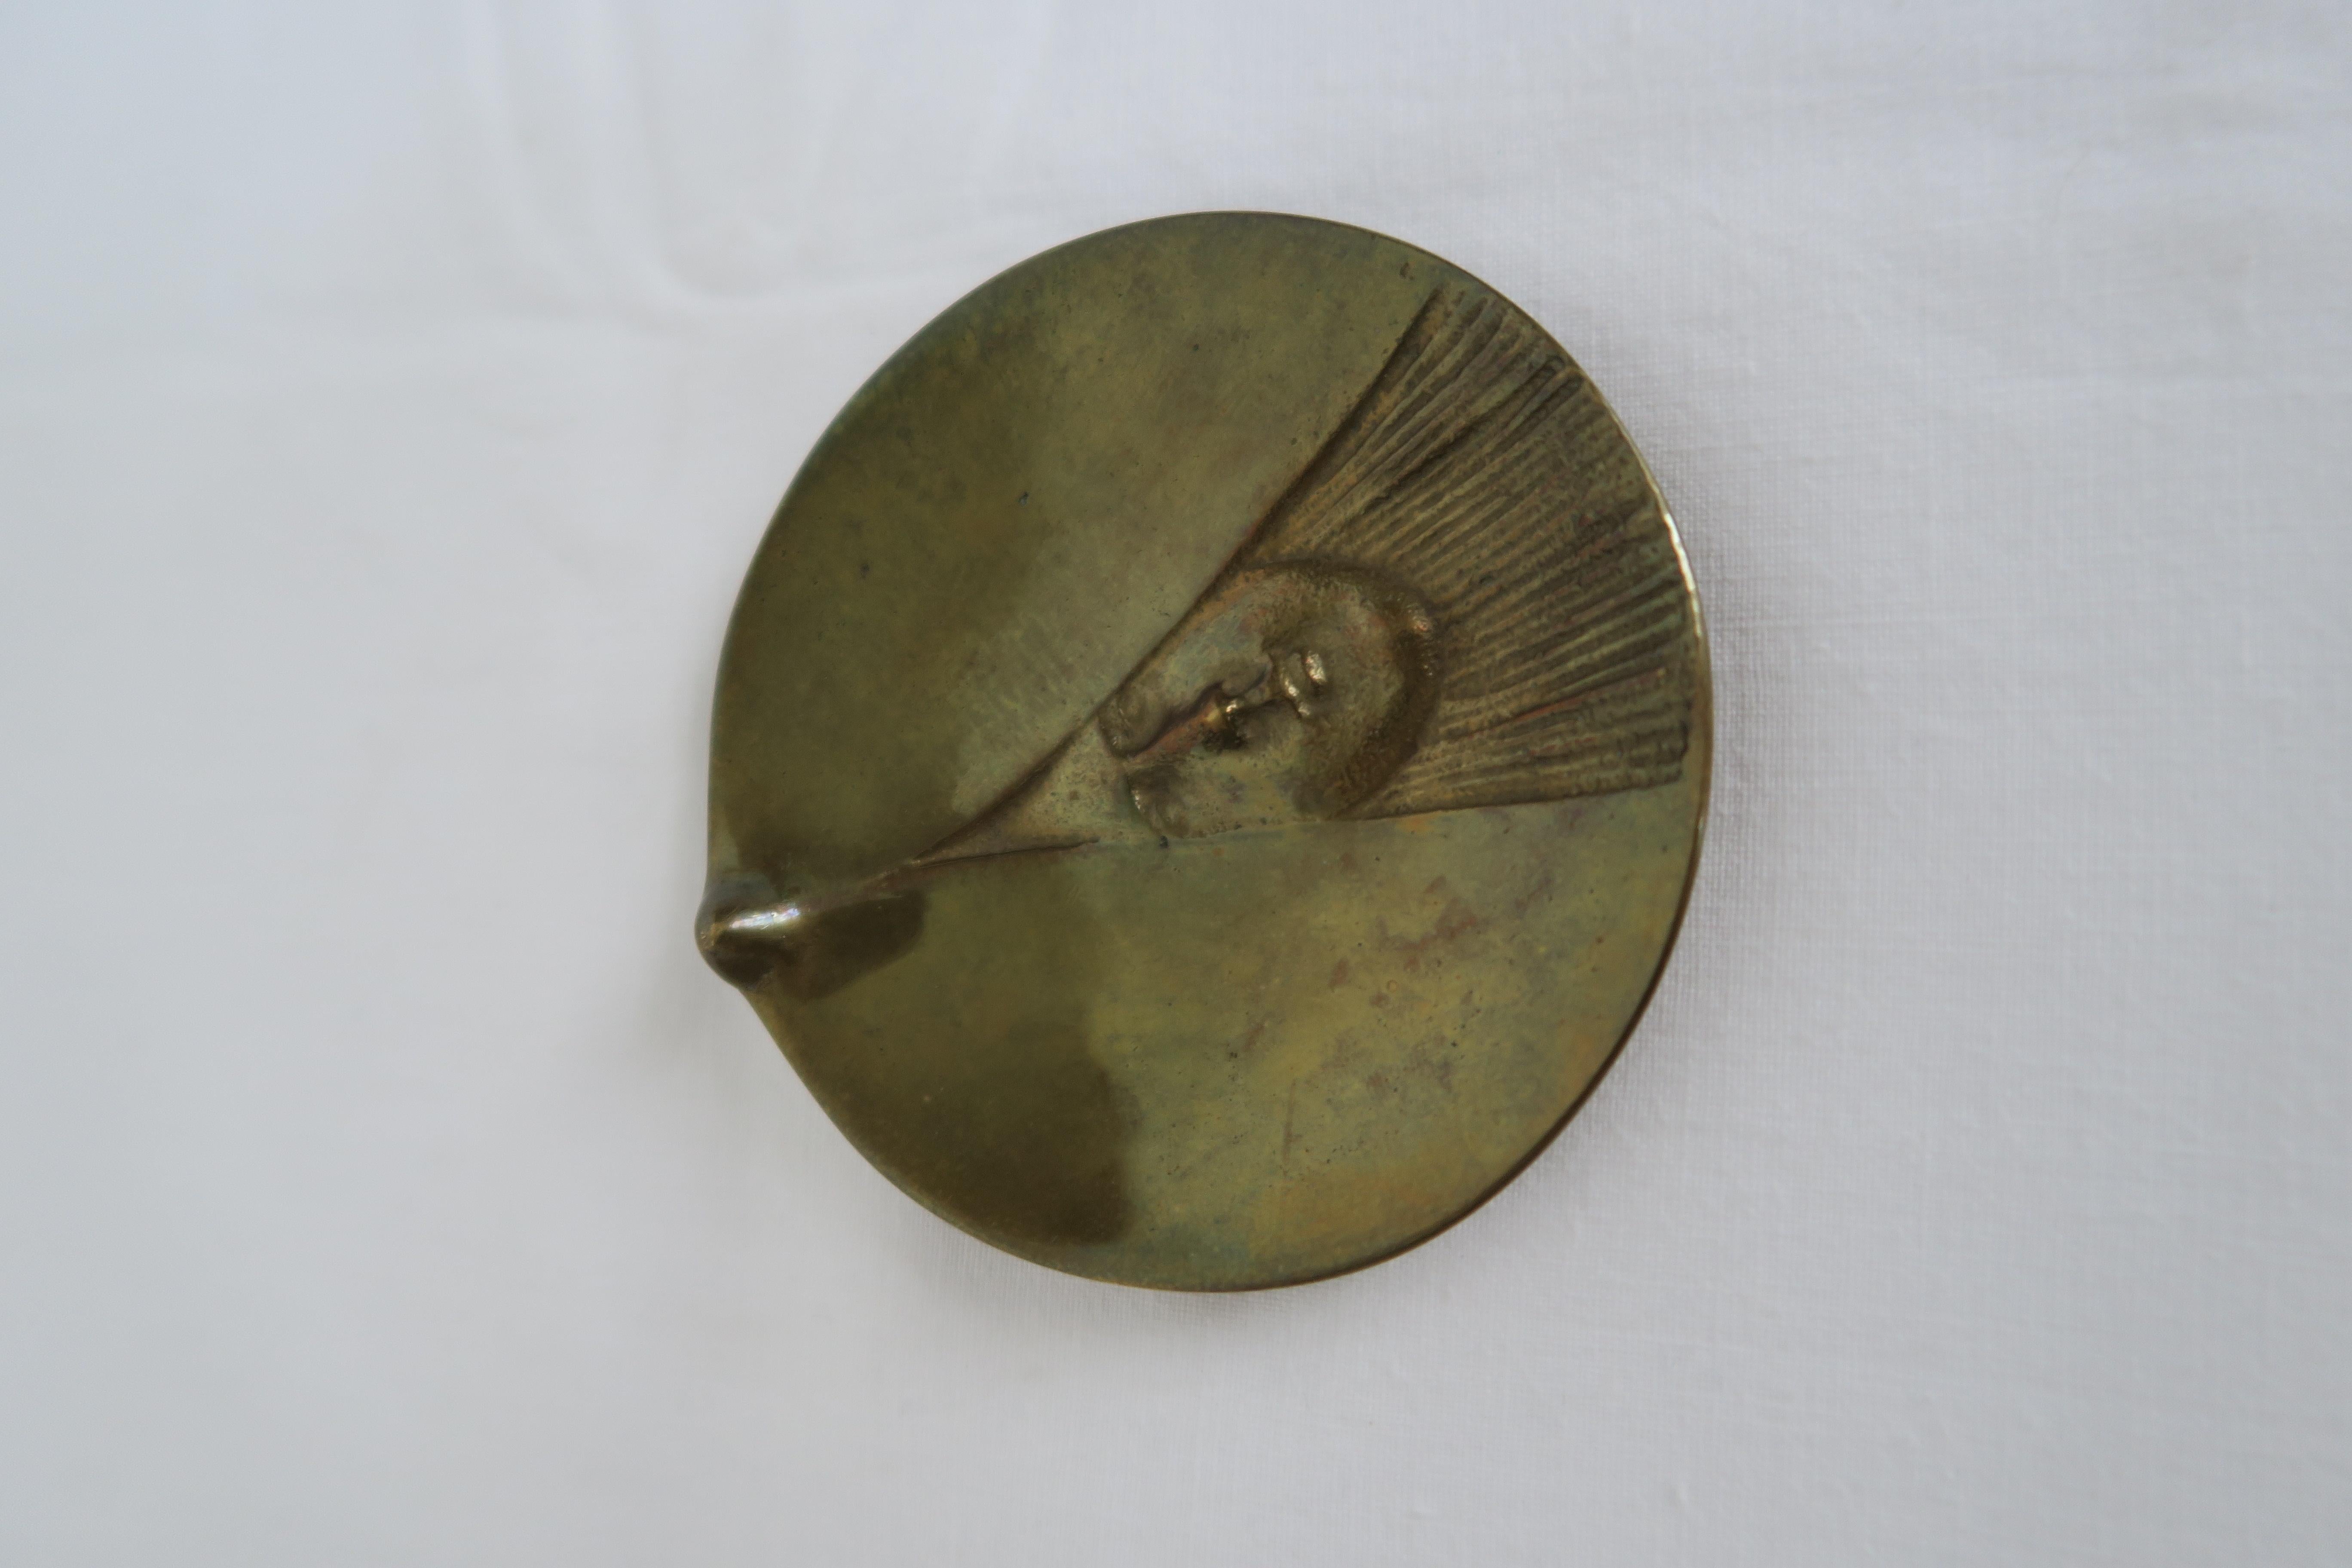 Austrian Karl Hagenauer Solid Brass Face Ashtray, Designed 1900, Manufactured, 1950s